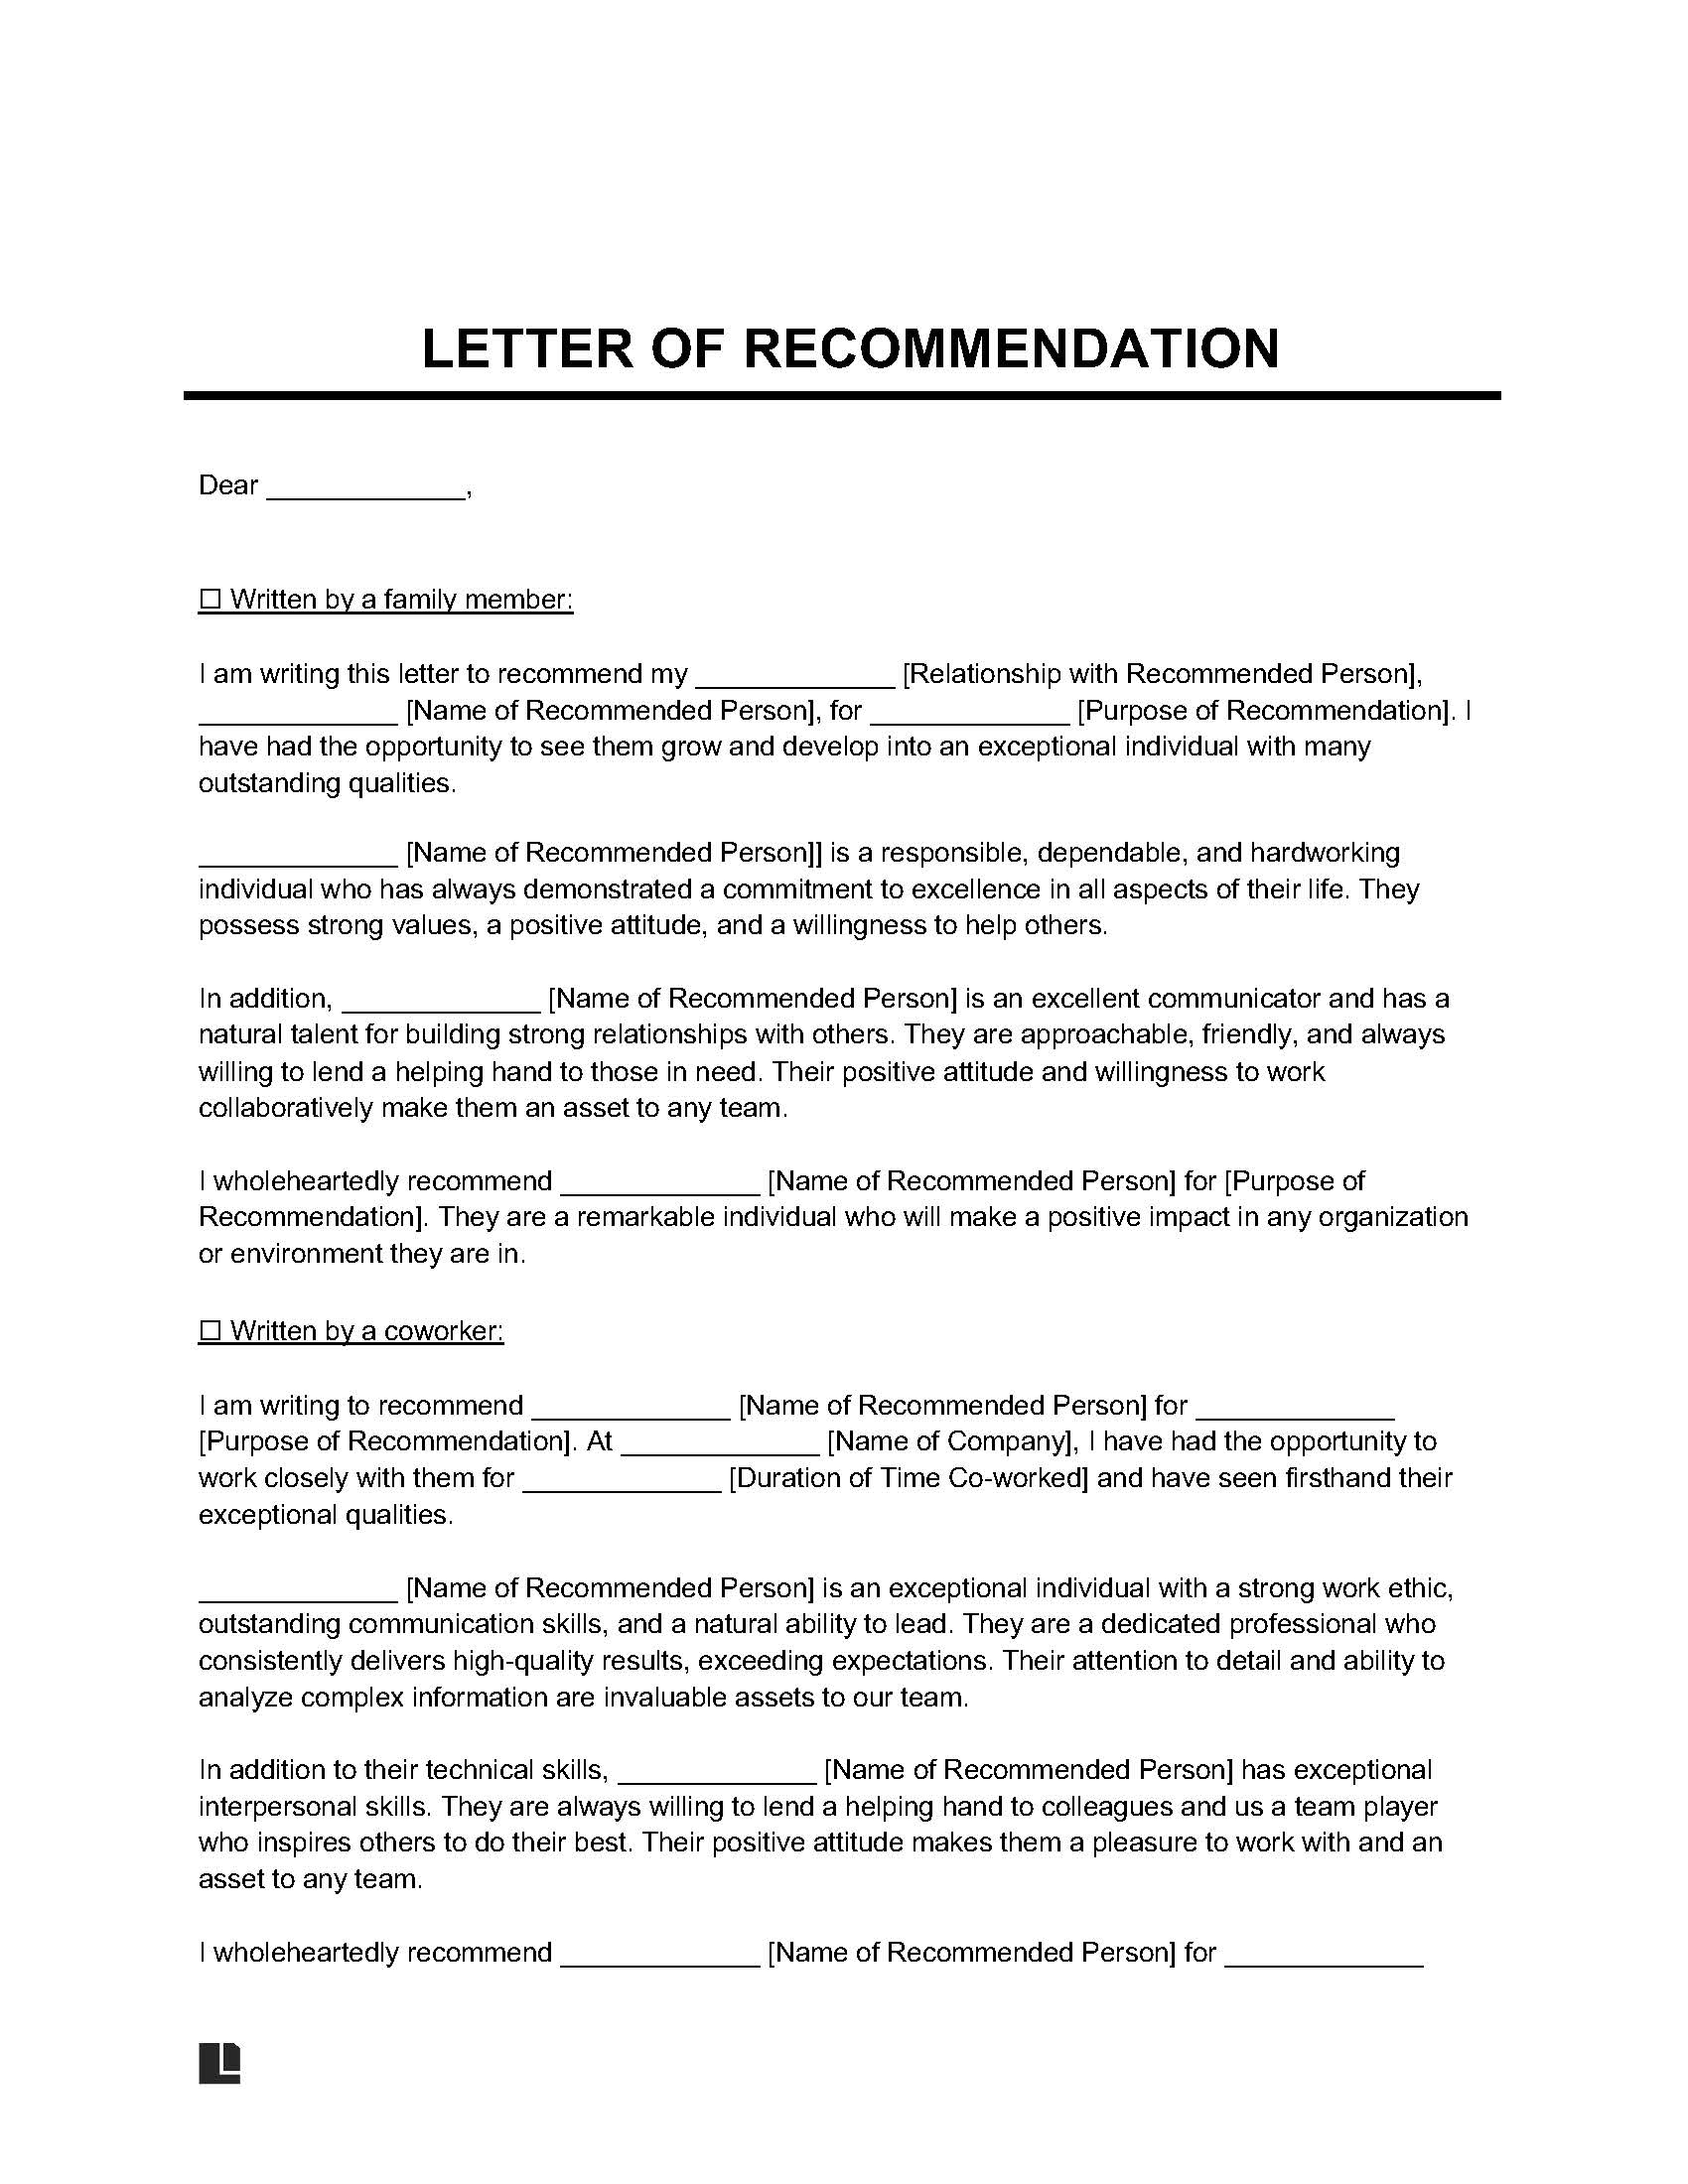 How To Ask For A Letter Of Recommendation Sample